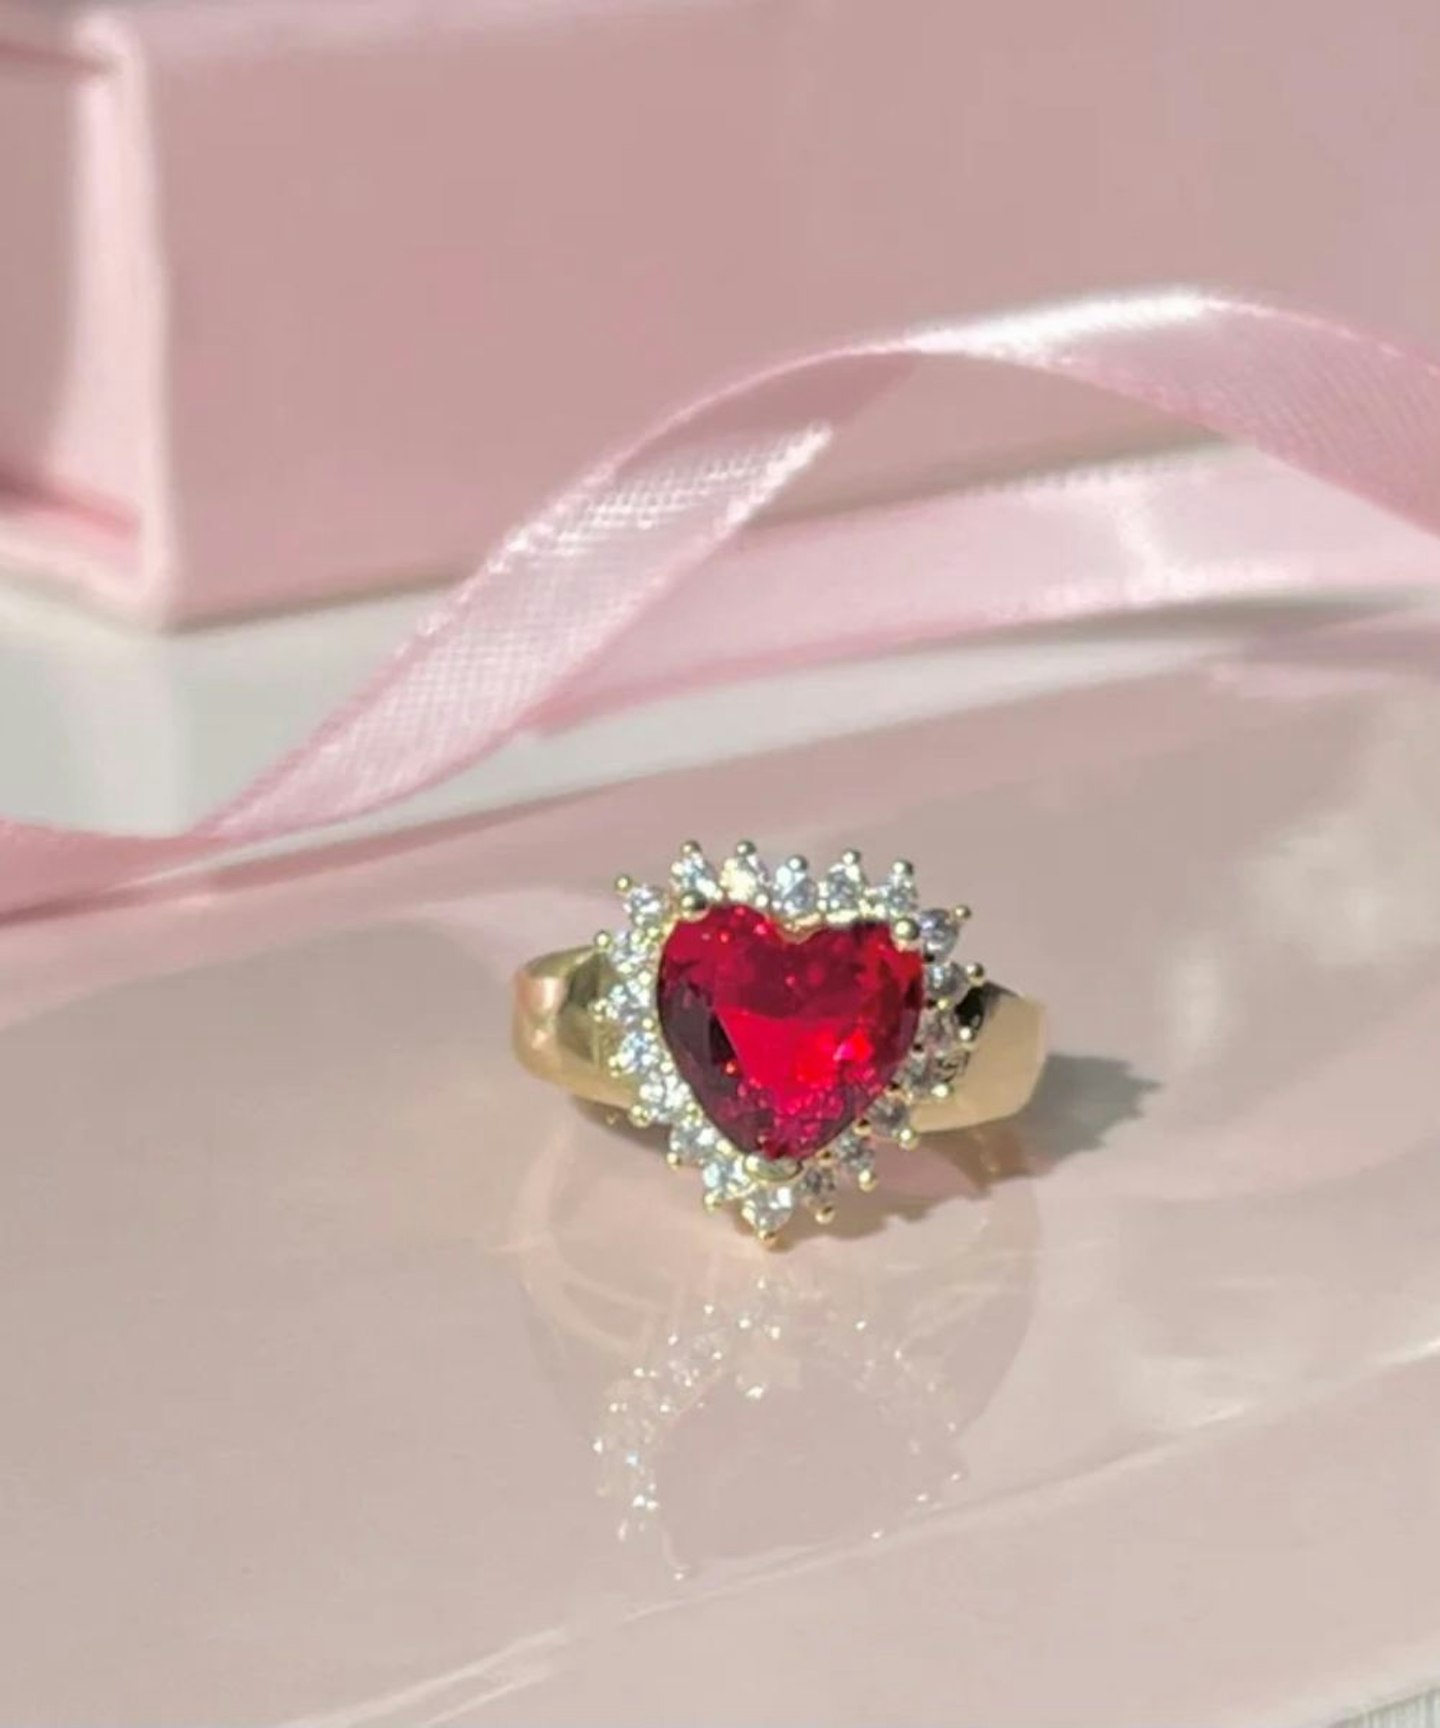 Taylor Swift inspired red heart ring